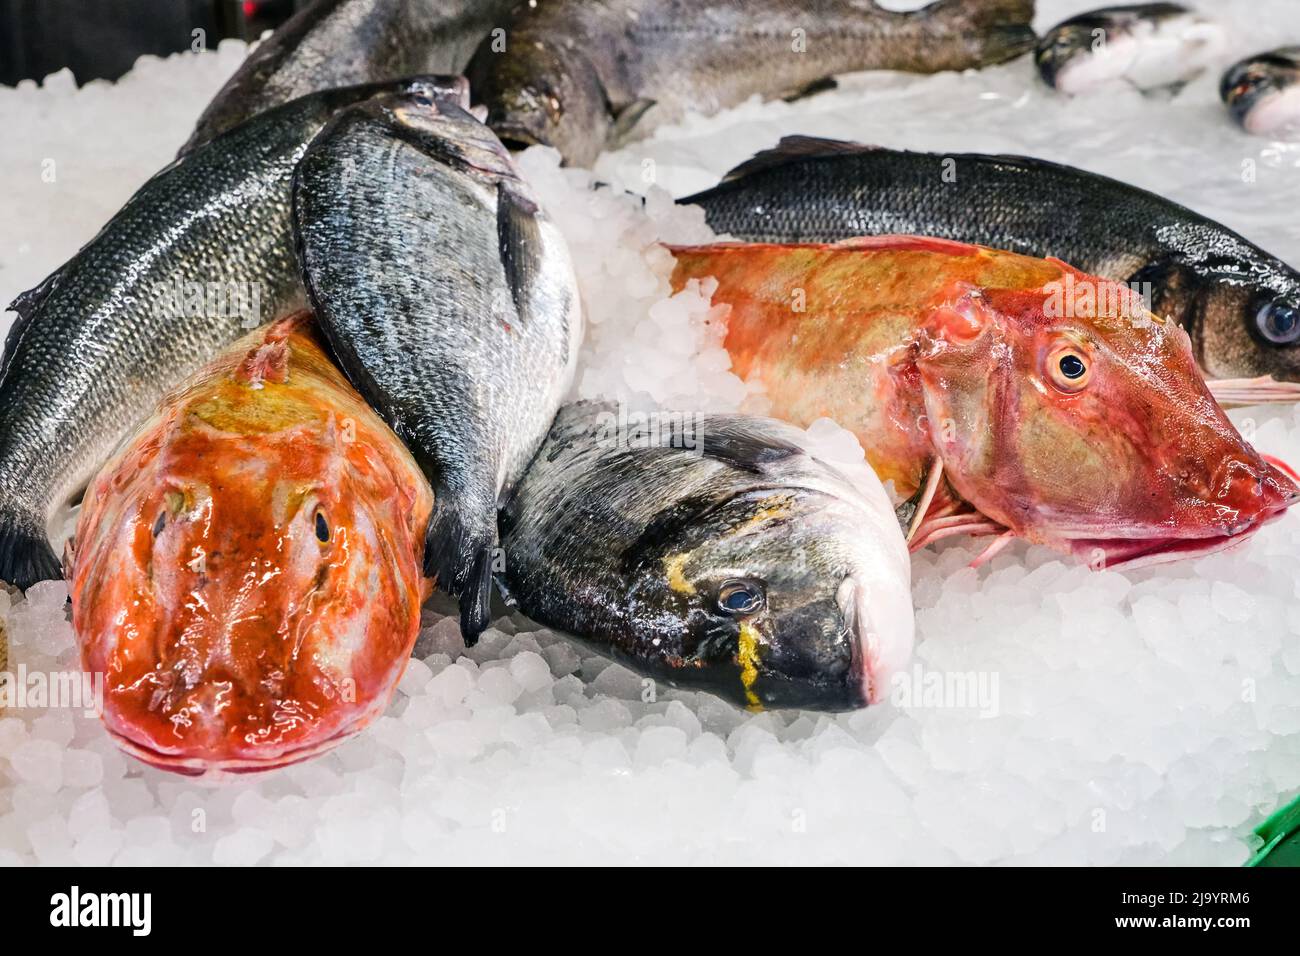 Red and gray fish for sale at a market Stock Photo